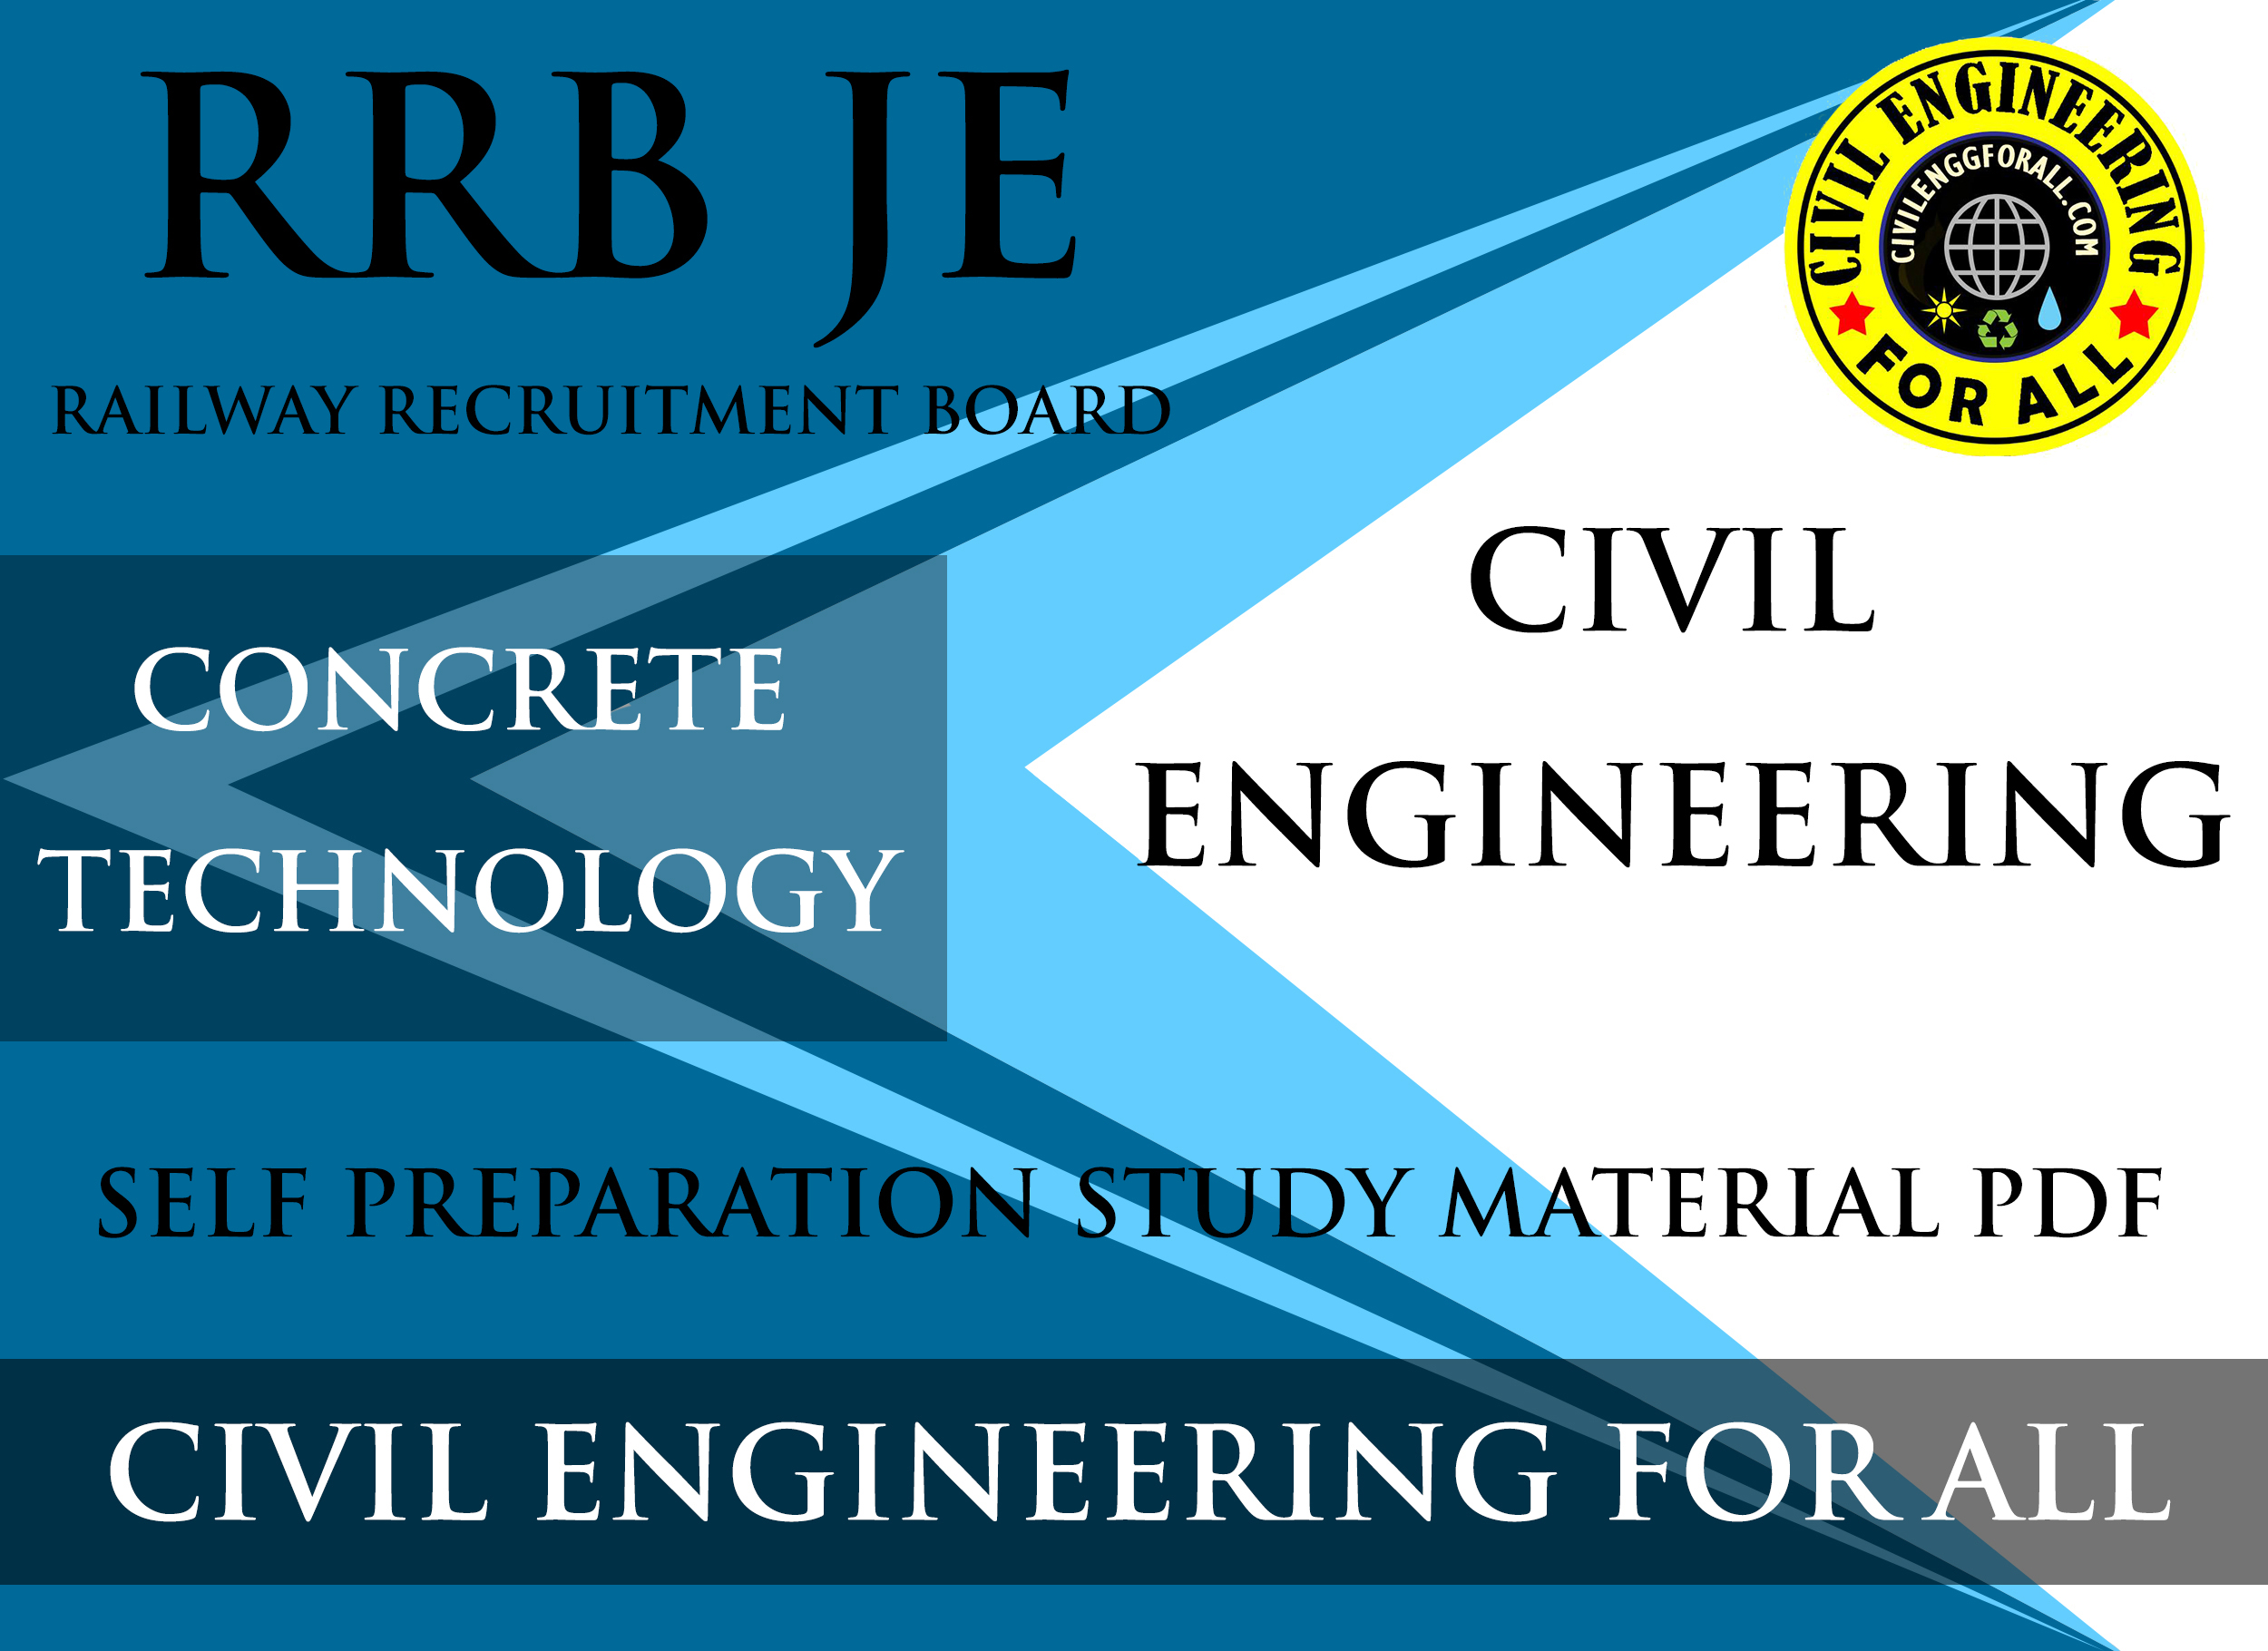 Concrete Technology Study Material for RRB JE Exam - CivilEnggForAll Exclusive